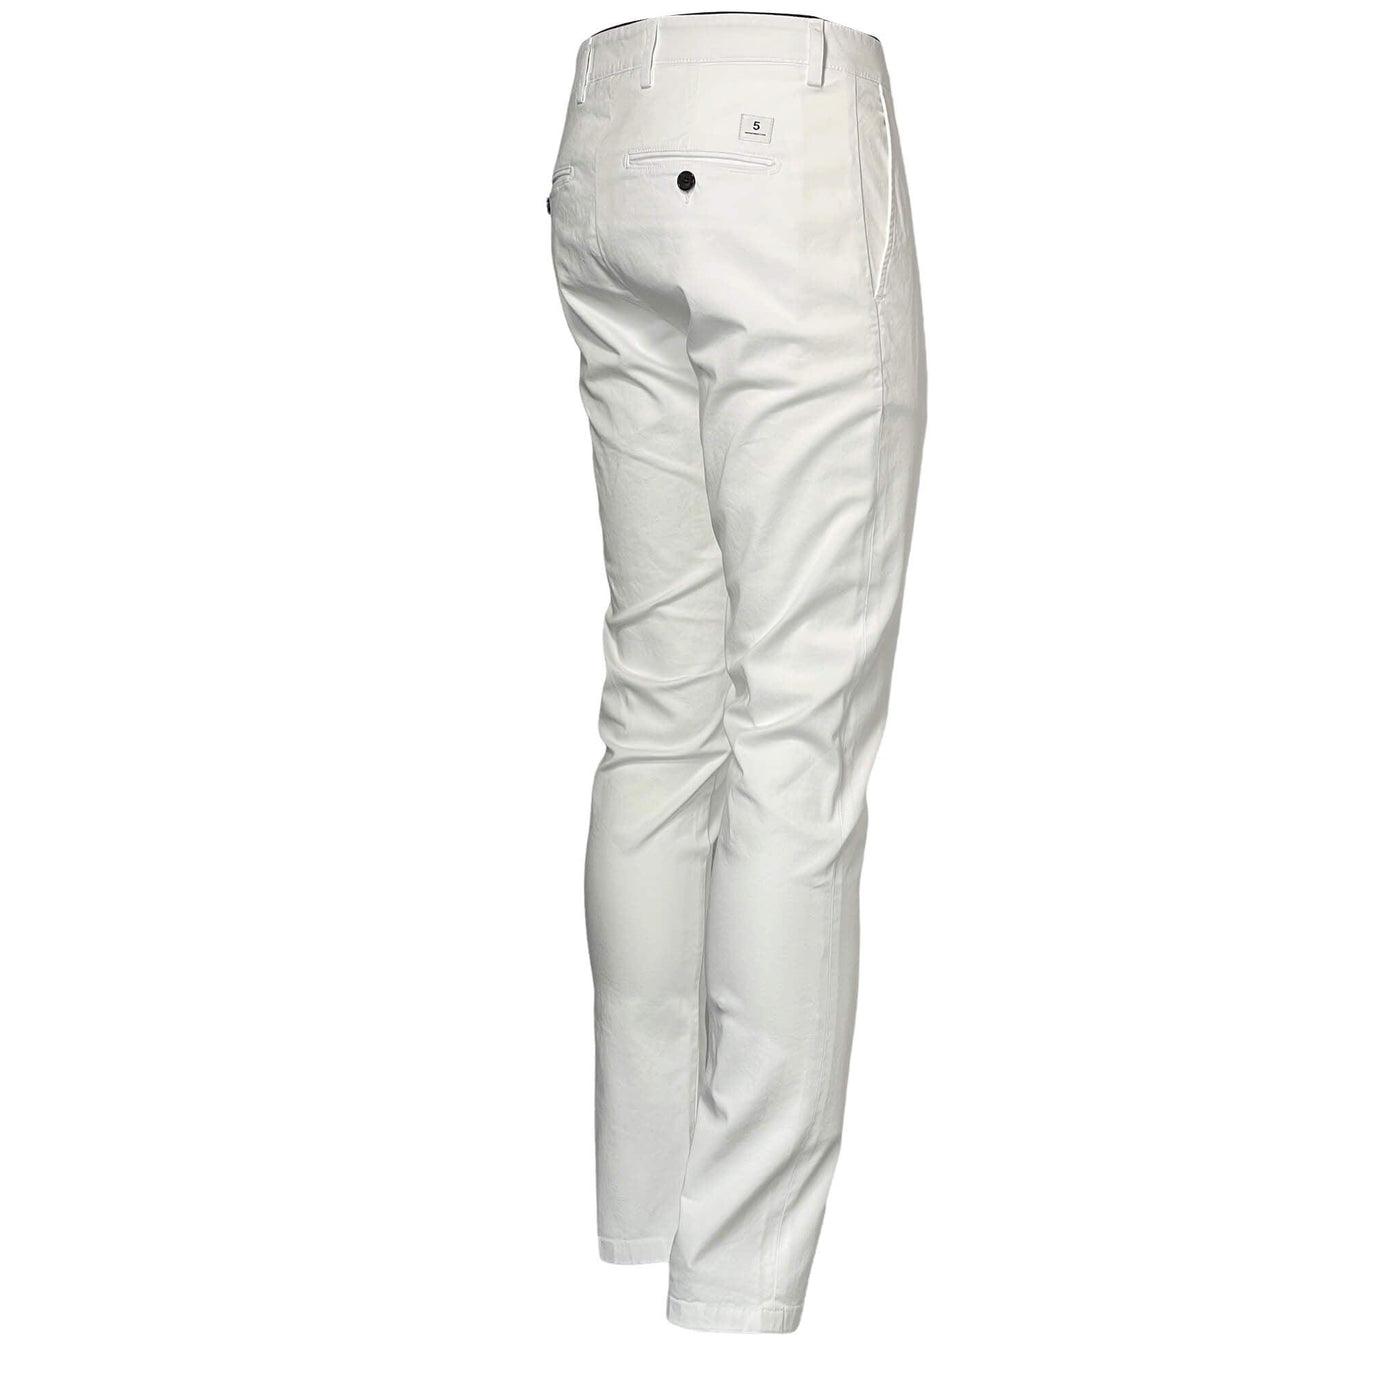 Dep5 Pantalone Mike, Up002.1ts0001, Chinos Superslim Dritto, 001 Bianco, Bassiniboutique.it, 2022 p/e